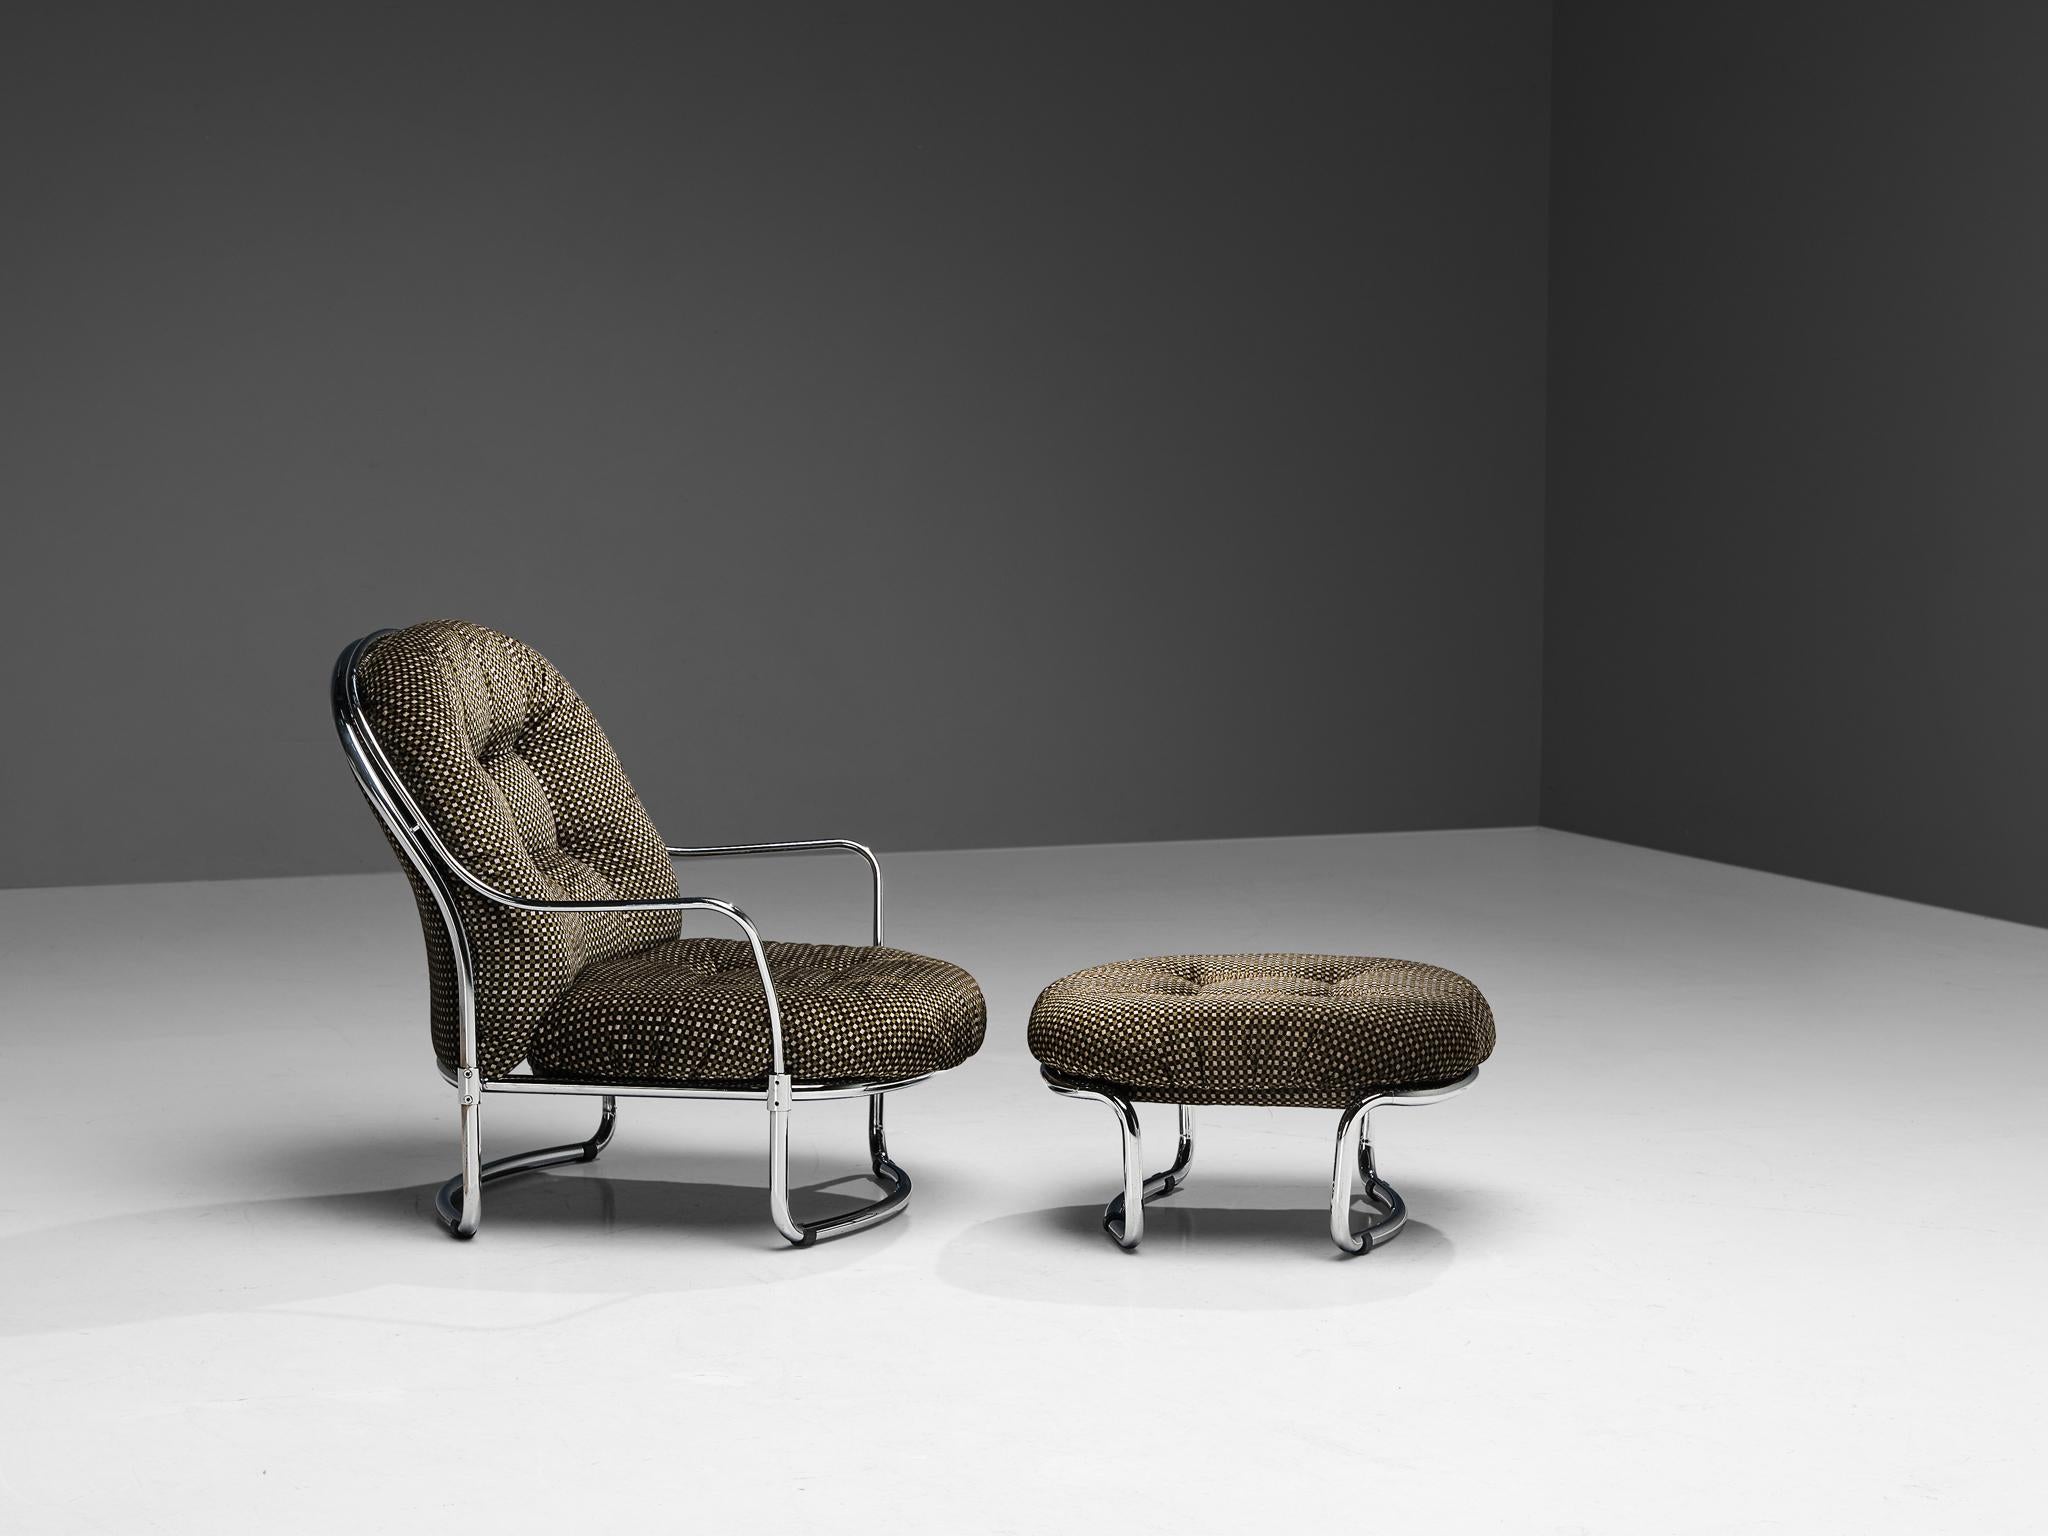 Carlo De Carli for Cinova, lounge chair model '915' with ottoman, metal, chrome, fabric, Italy, 1969.

Elegant, tubular armchair with ottoman designed by Carlo De Carli in 1969, manufactured by Cinova, Italy. Both pieces feature a curved, chromed